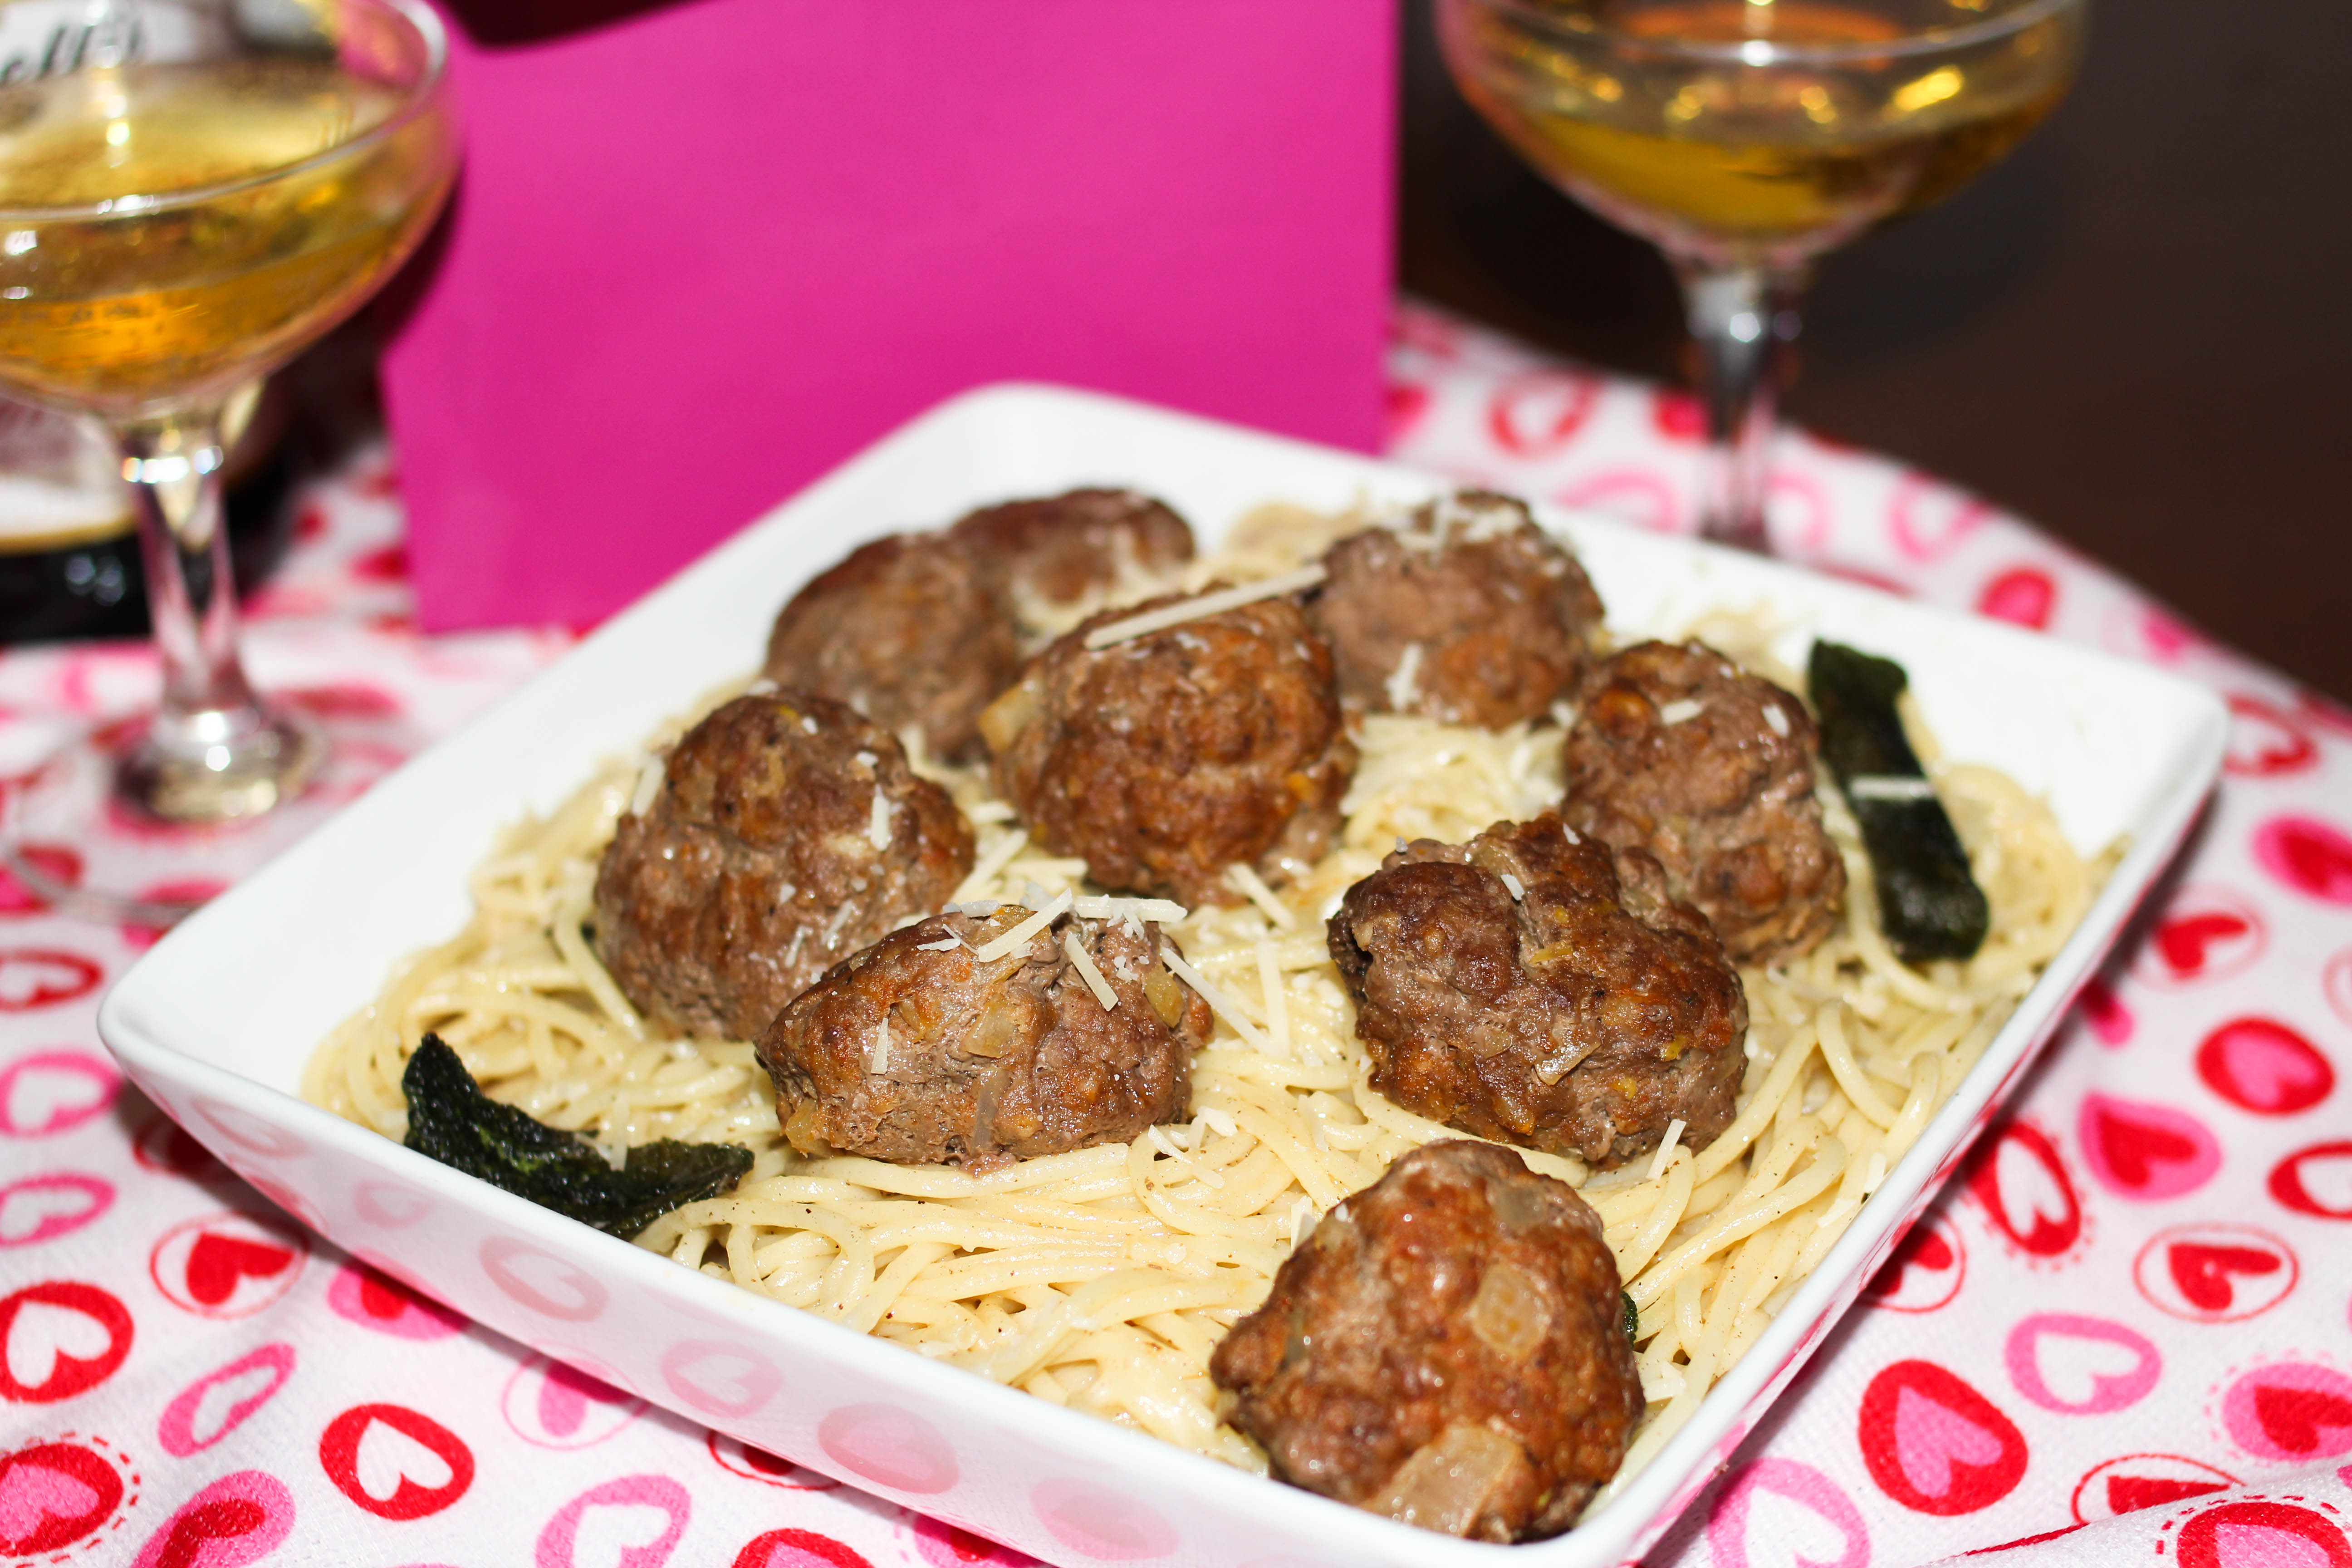 Angus Beef Meatballs with Lemon Butter Pasta is a great twist on classic meatballs and pasta.